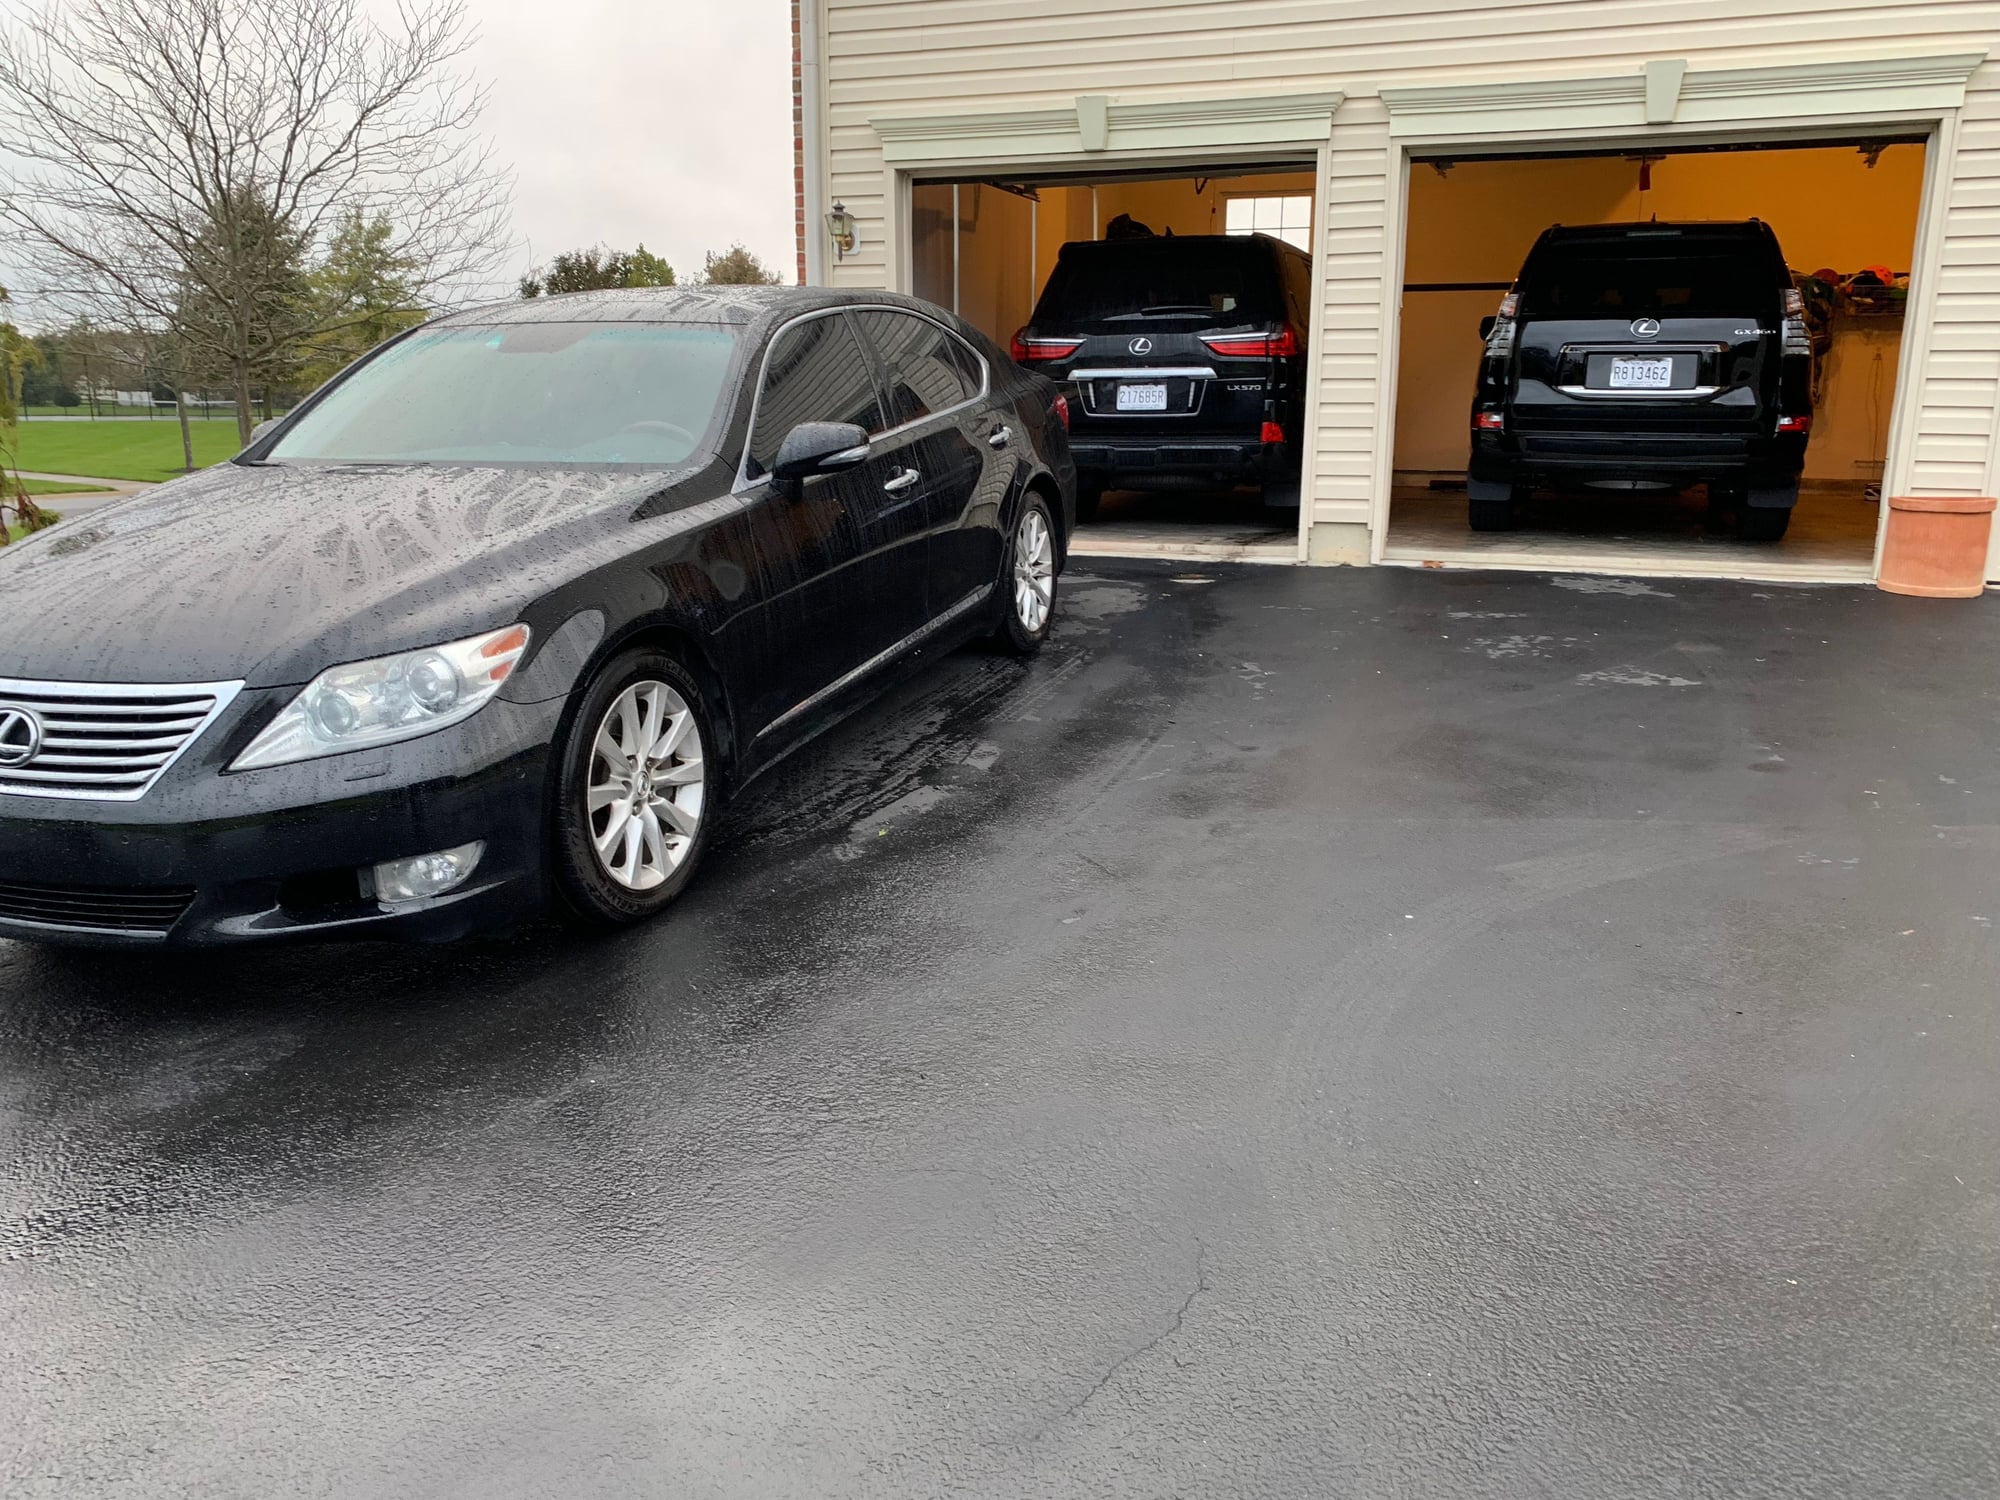 2011 Lexus LS460 - Delaware -Ls460 2011 AWD black on black good condition, very well maintained. - Used - VIN JTHCL5EF2B5010127 - 122,000 Miles - 8 cyl - AWD - Automatic - Sedan - Black - Newark, DE 19702, United States